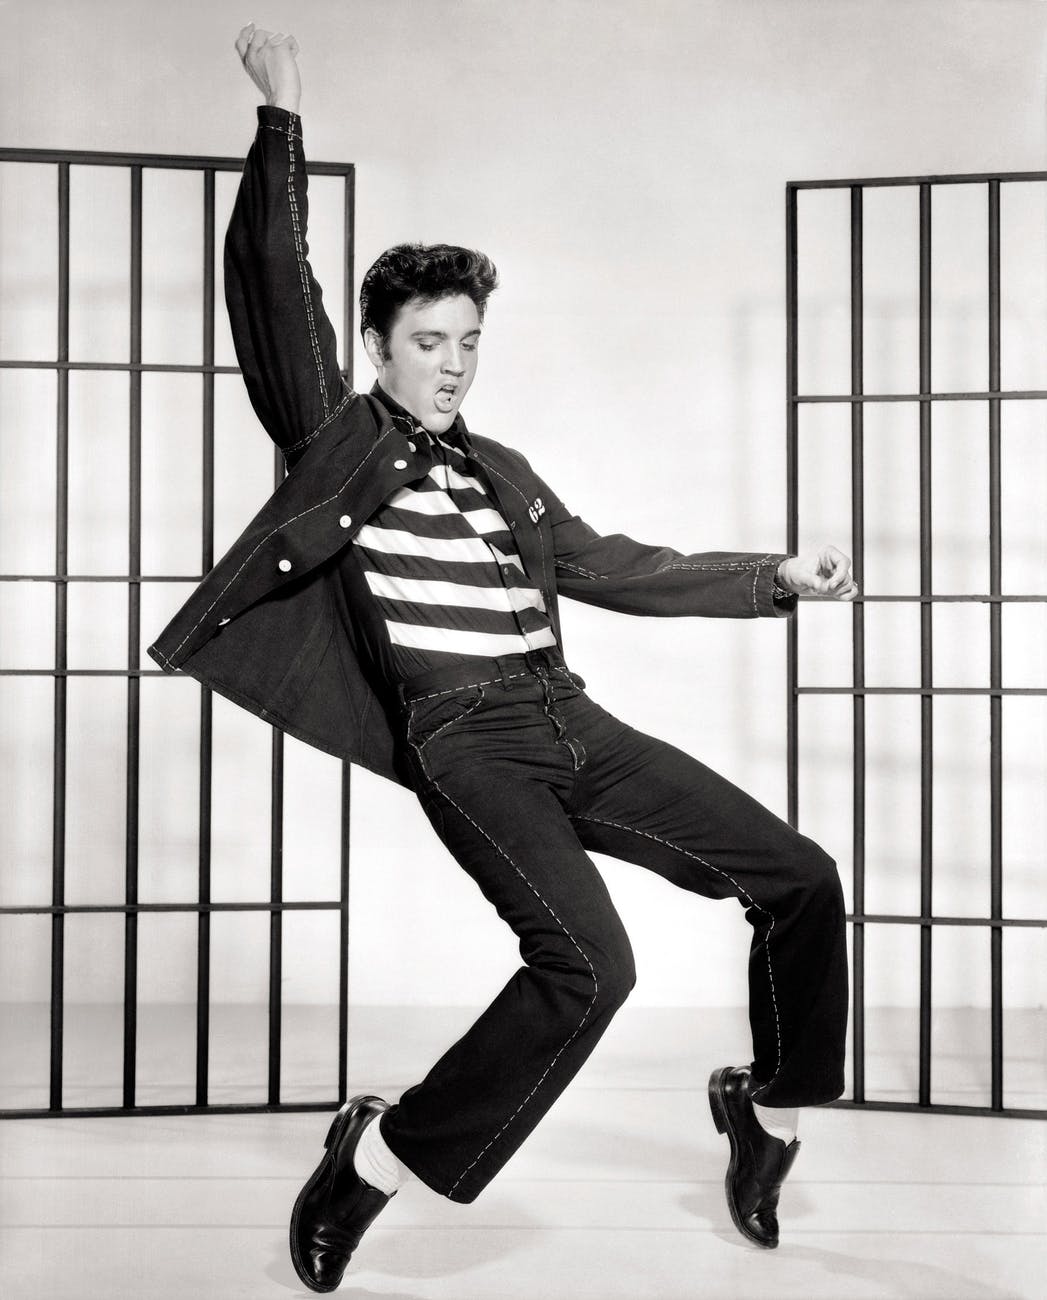 adolescent adult black and white casual
Elvis Presley